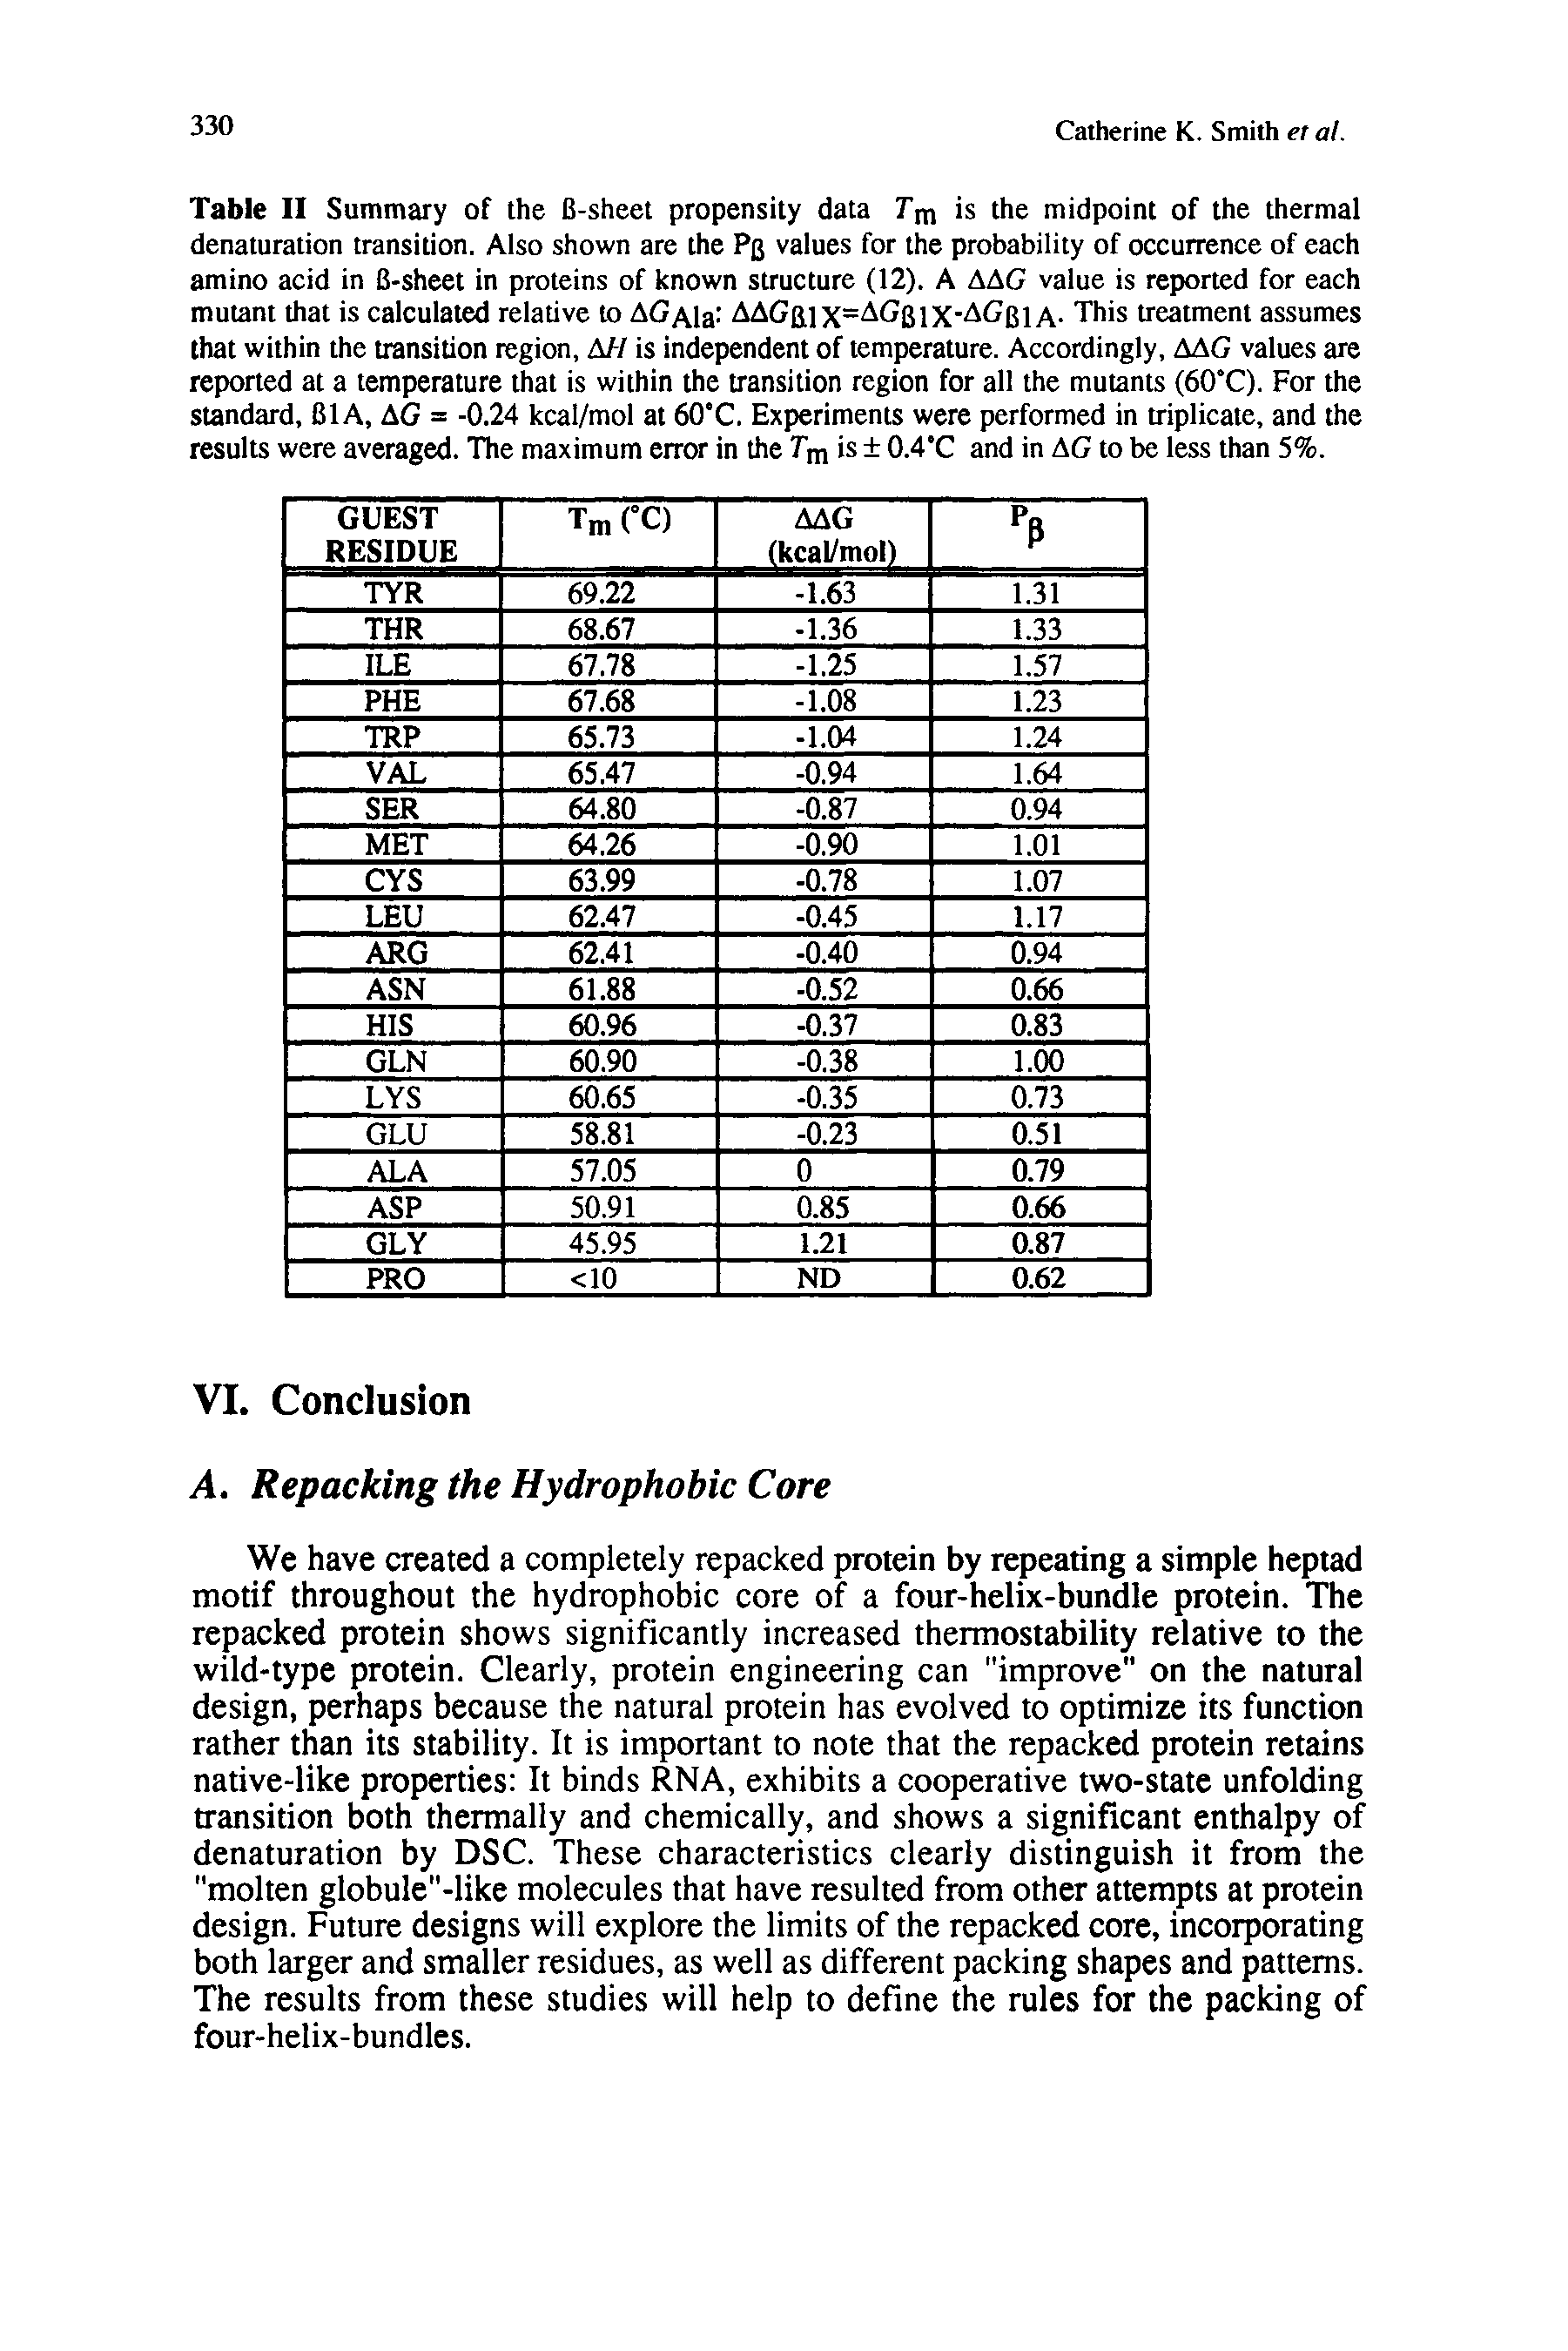 Table II Summary of the B-sheet propensity data Tm is the midpoint of the thermal denaturation transition. Also shown are the Pb values for the probability of occurrence of each amino acid in B-sheet in proteins of known structure (12). A AAG value is reported for each mutant that is calculated relative to AG Ala GBi1X=AGB1X AGbia- This treatment assumes that within the transition region, A// is independent of temperature. Accordingly, AAG values are reported at a temperature that is within the transition region for all the mutants (60 C). For the standard, BIA, AG = -0.24 kcal/mol at 60 C. Experiments were performed in triplicate, and the results were averaged. The maximum error in the Tm is 0.4 C and in AG to be less than 5%.